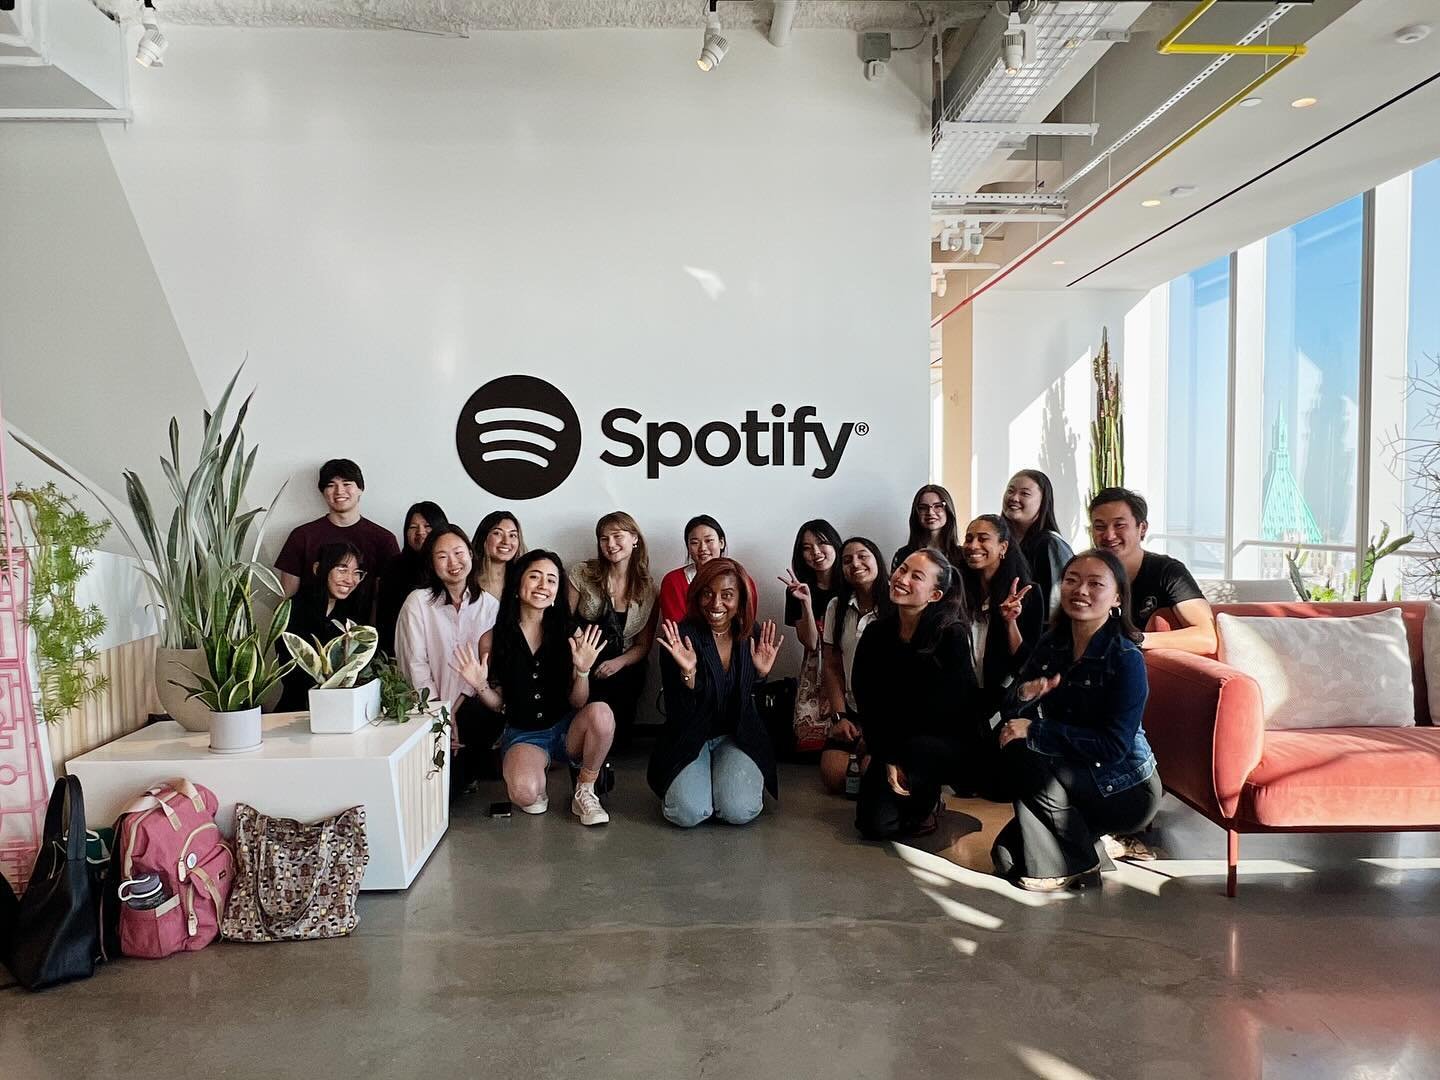 CommClub at @spotify office!! What an incredible site visit 💚 

We had amazingly talented panelists talk to us about how PR and Communications works at Spotify, an office tour, networking time, and a fun Spotify Resonate Activity &mdash; truly an un